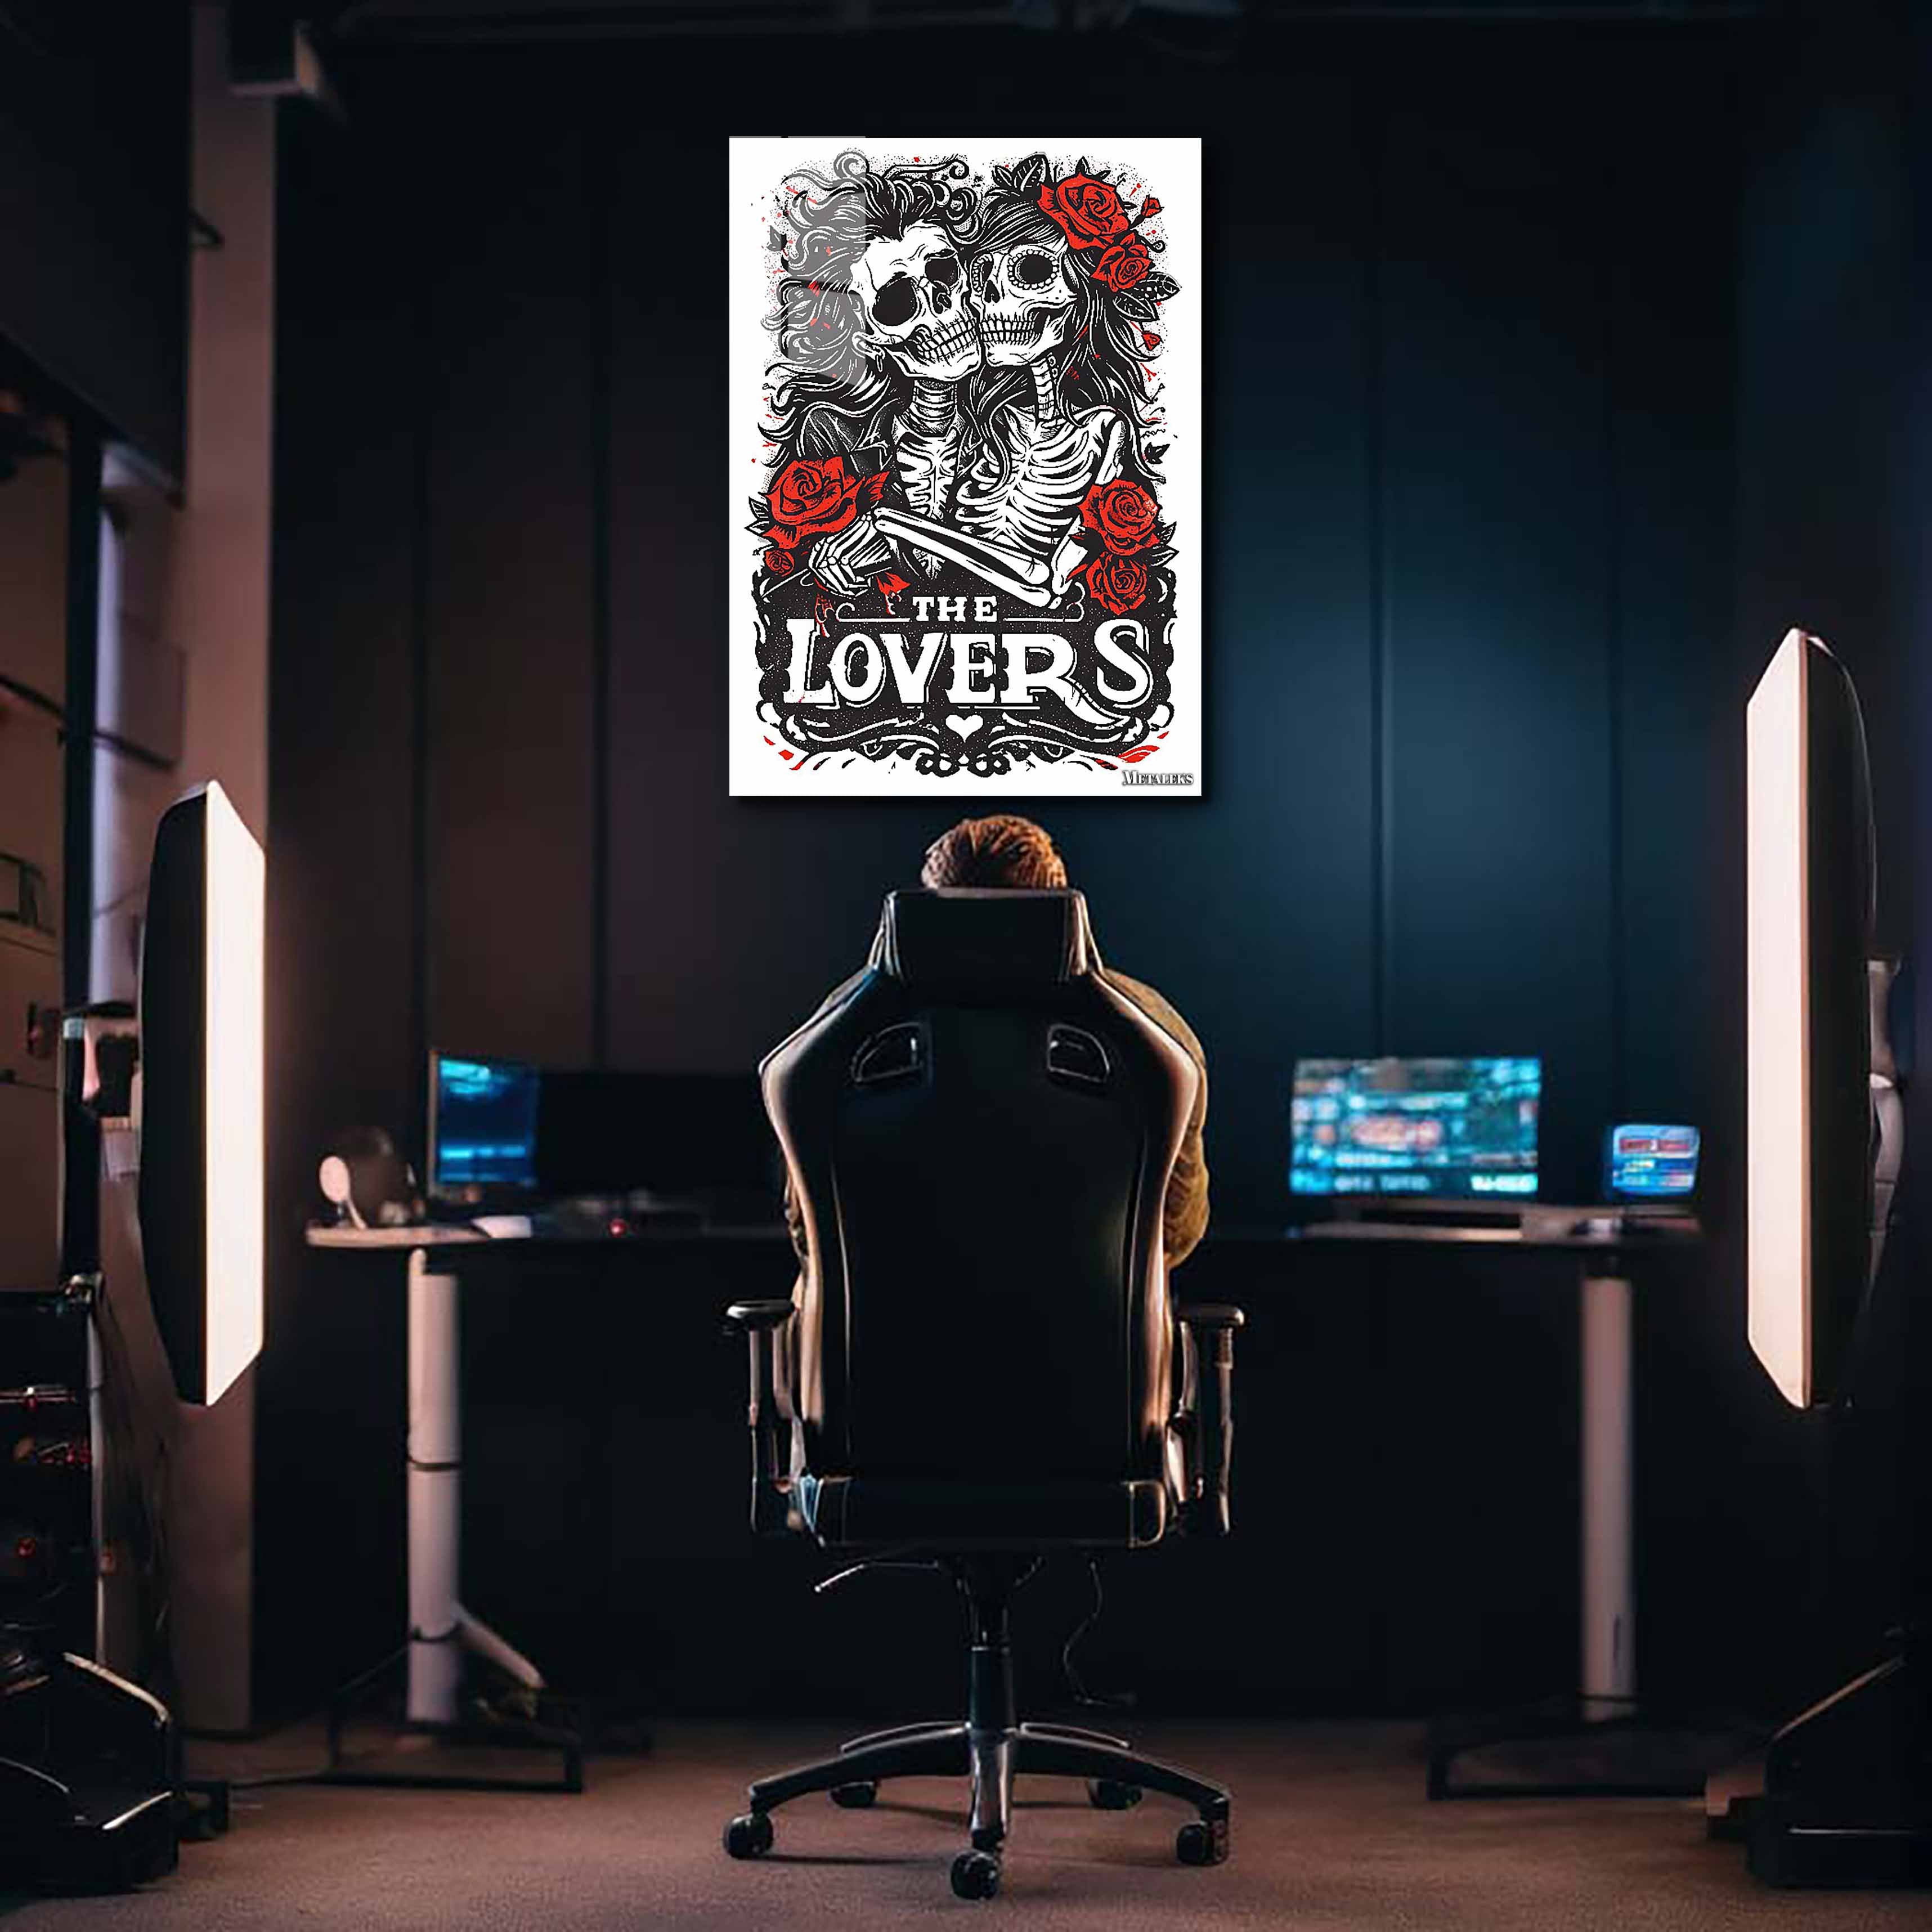 The Lovers Skeleton-designed by @Paragy